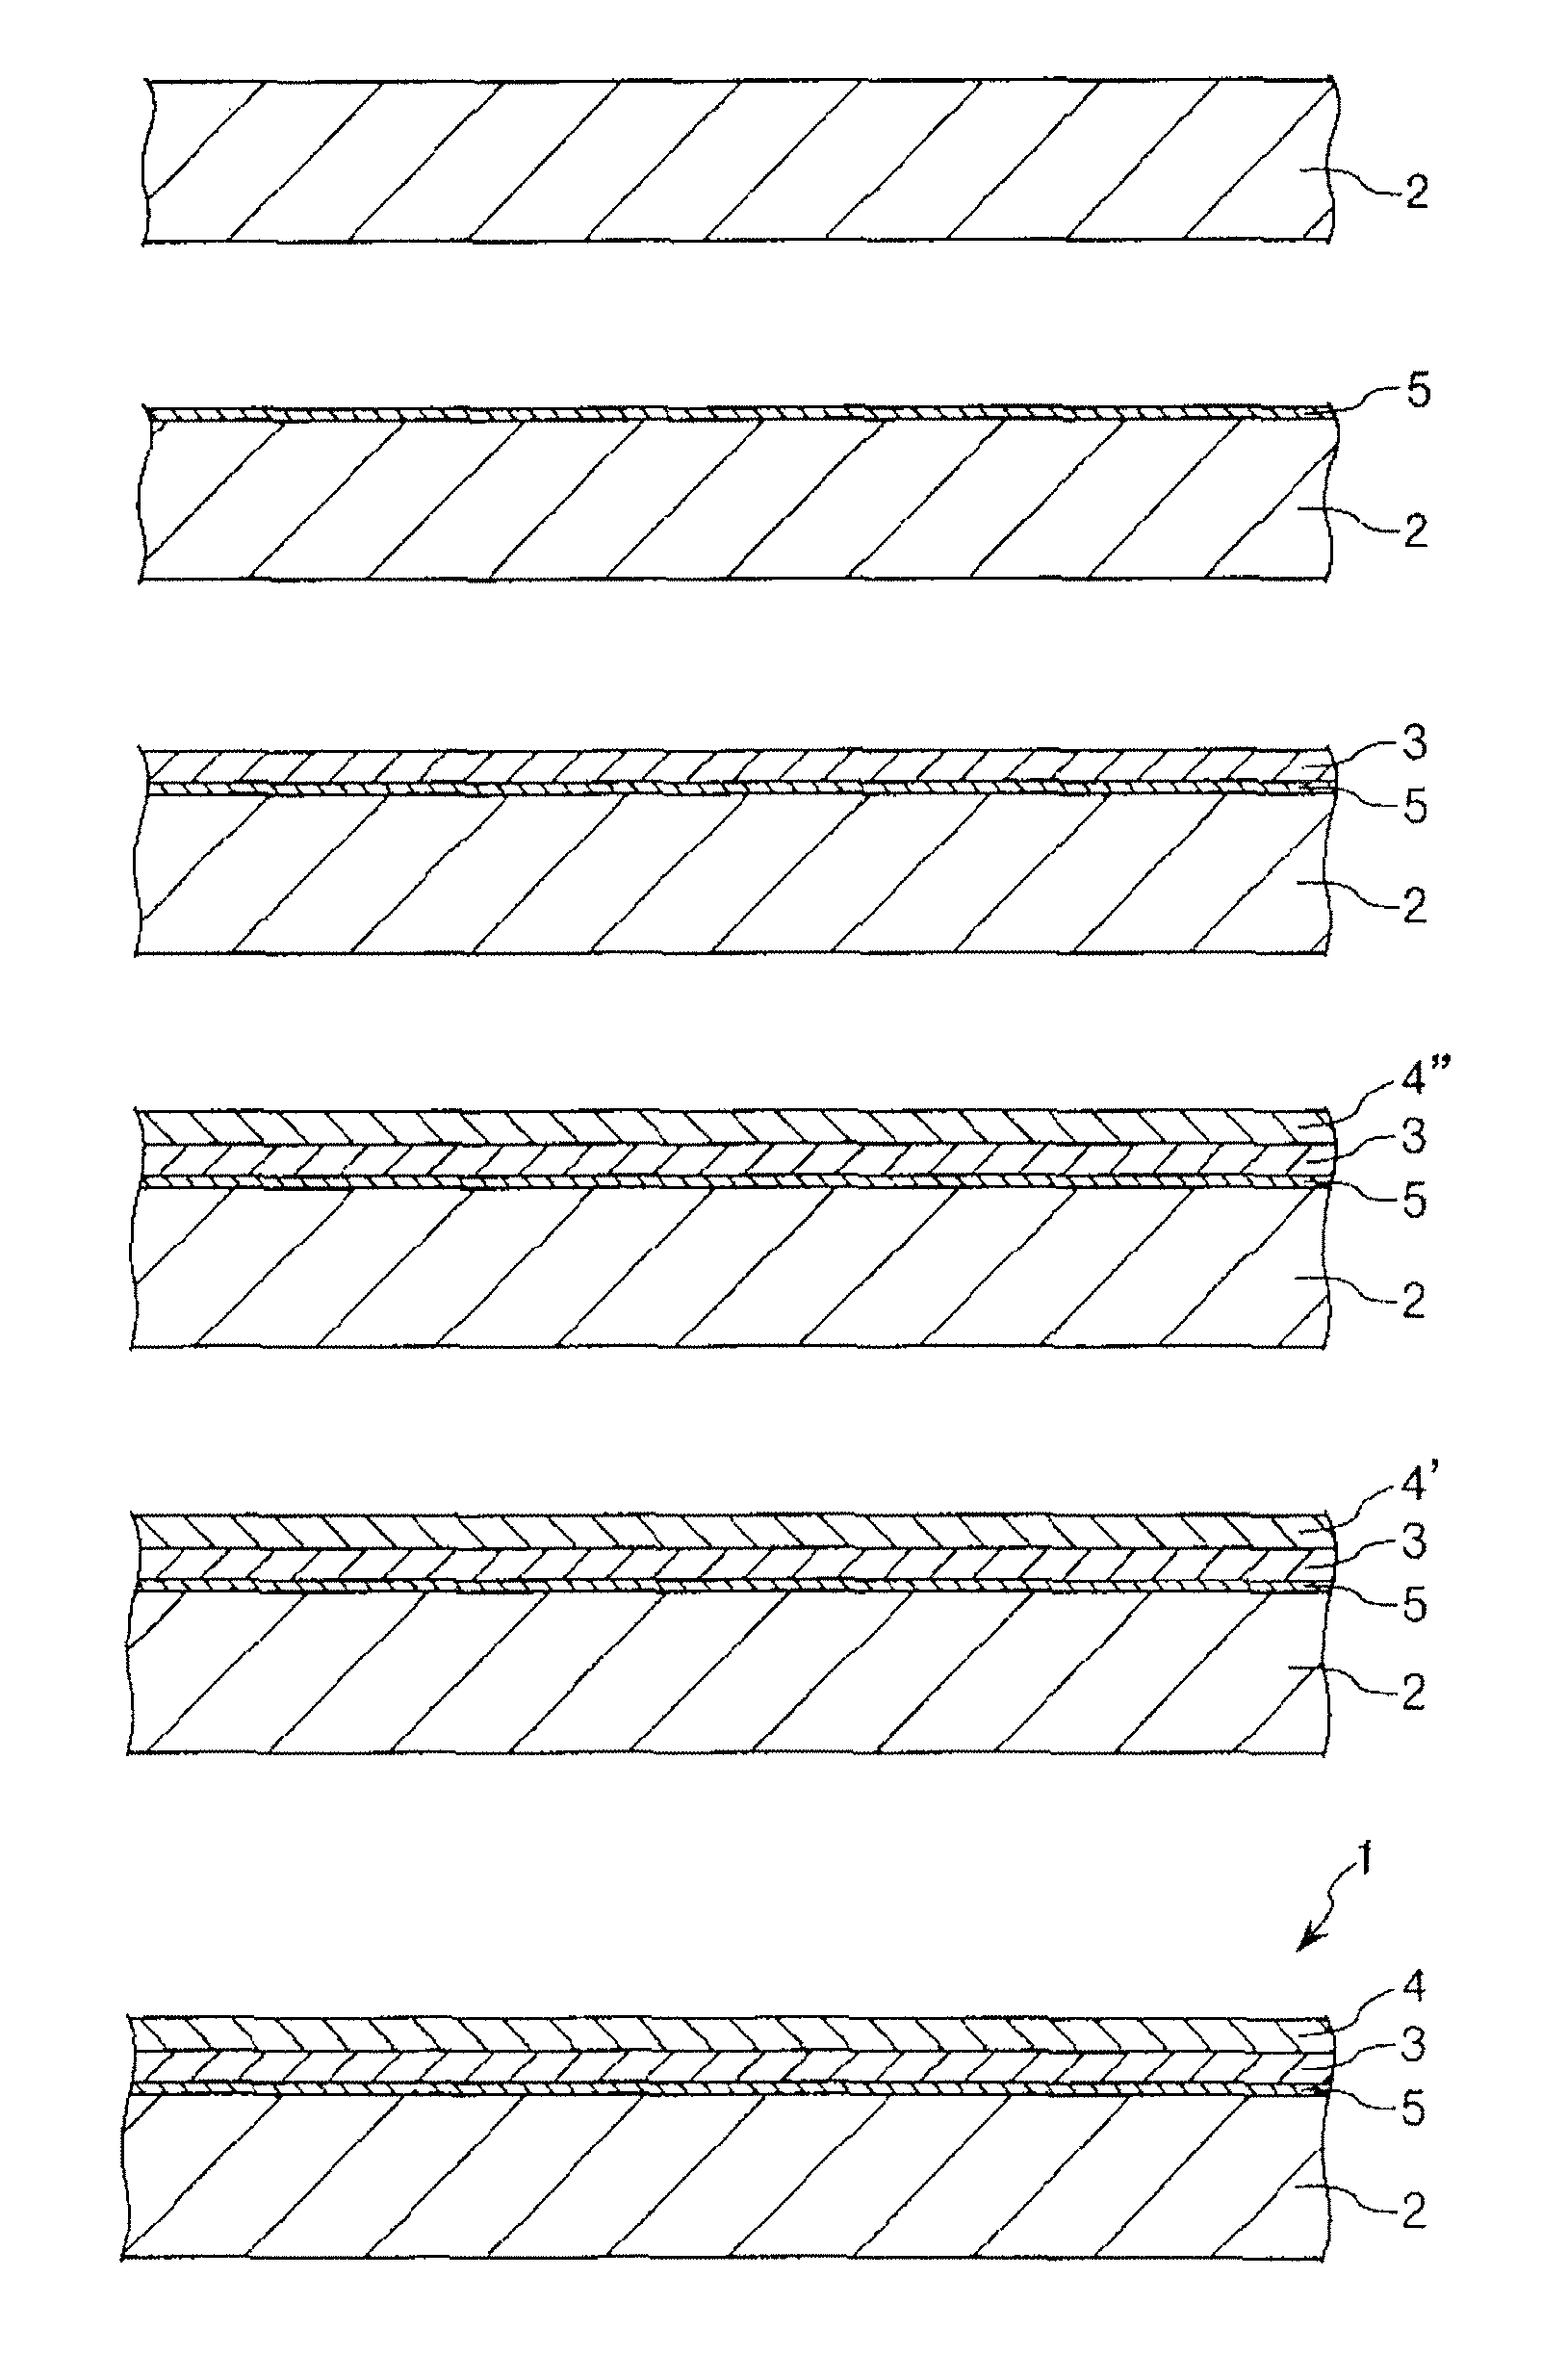 Method of manufacturing a decorative article, a decorative article, and a timepiece